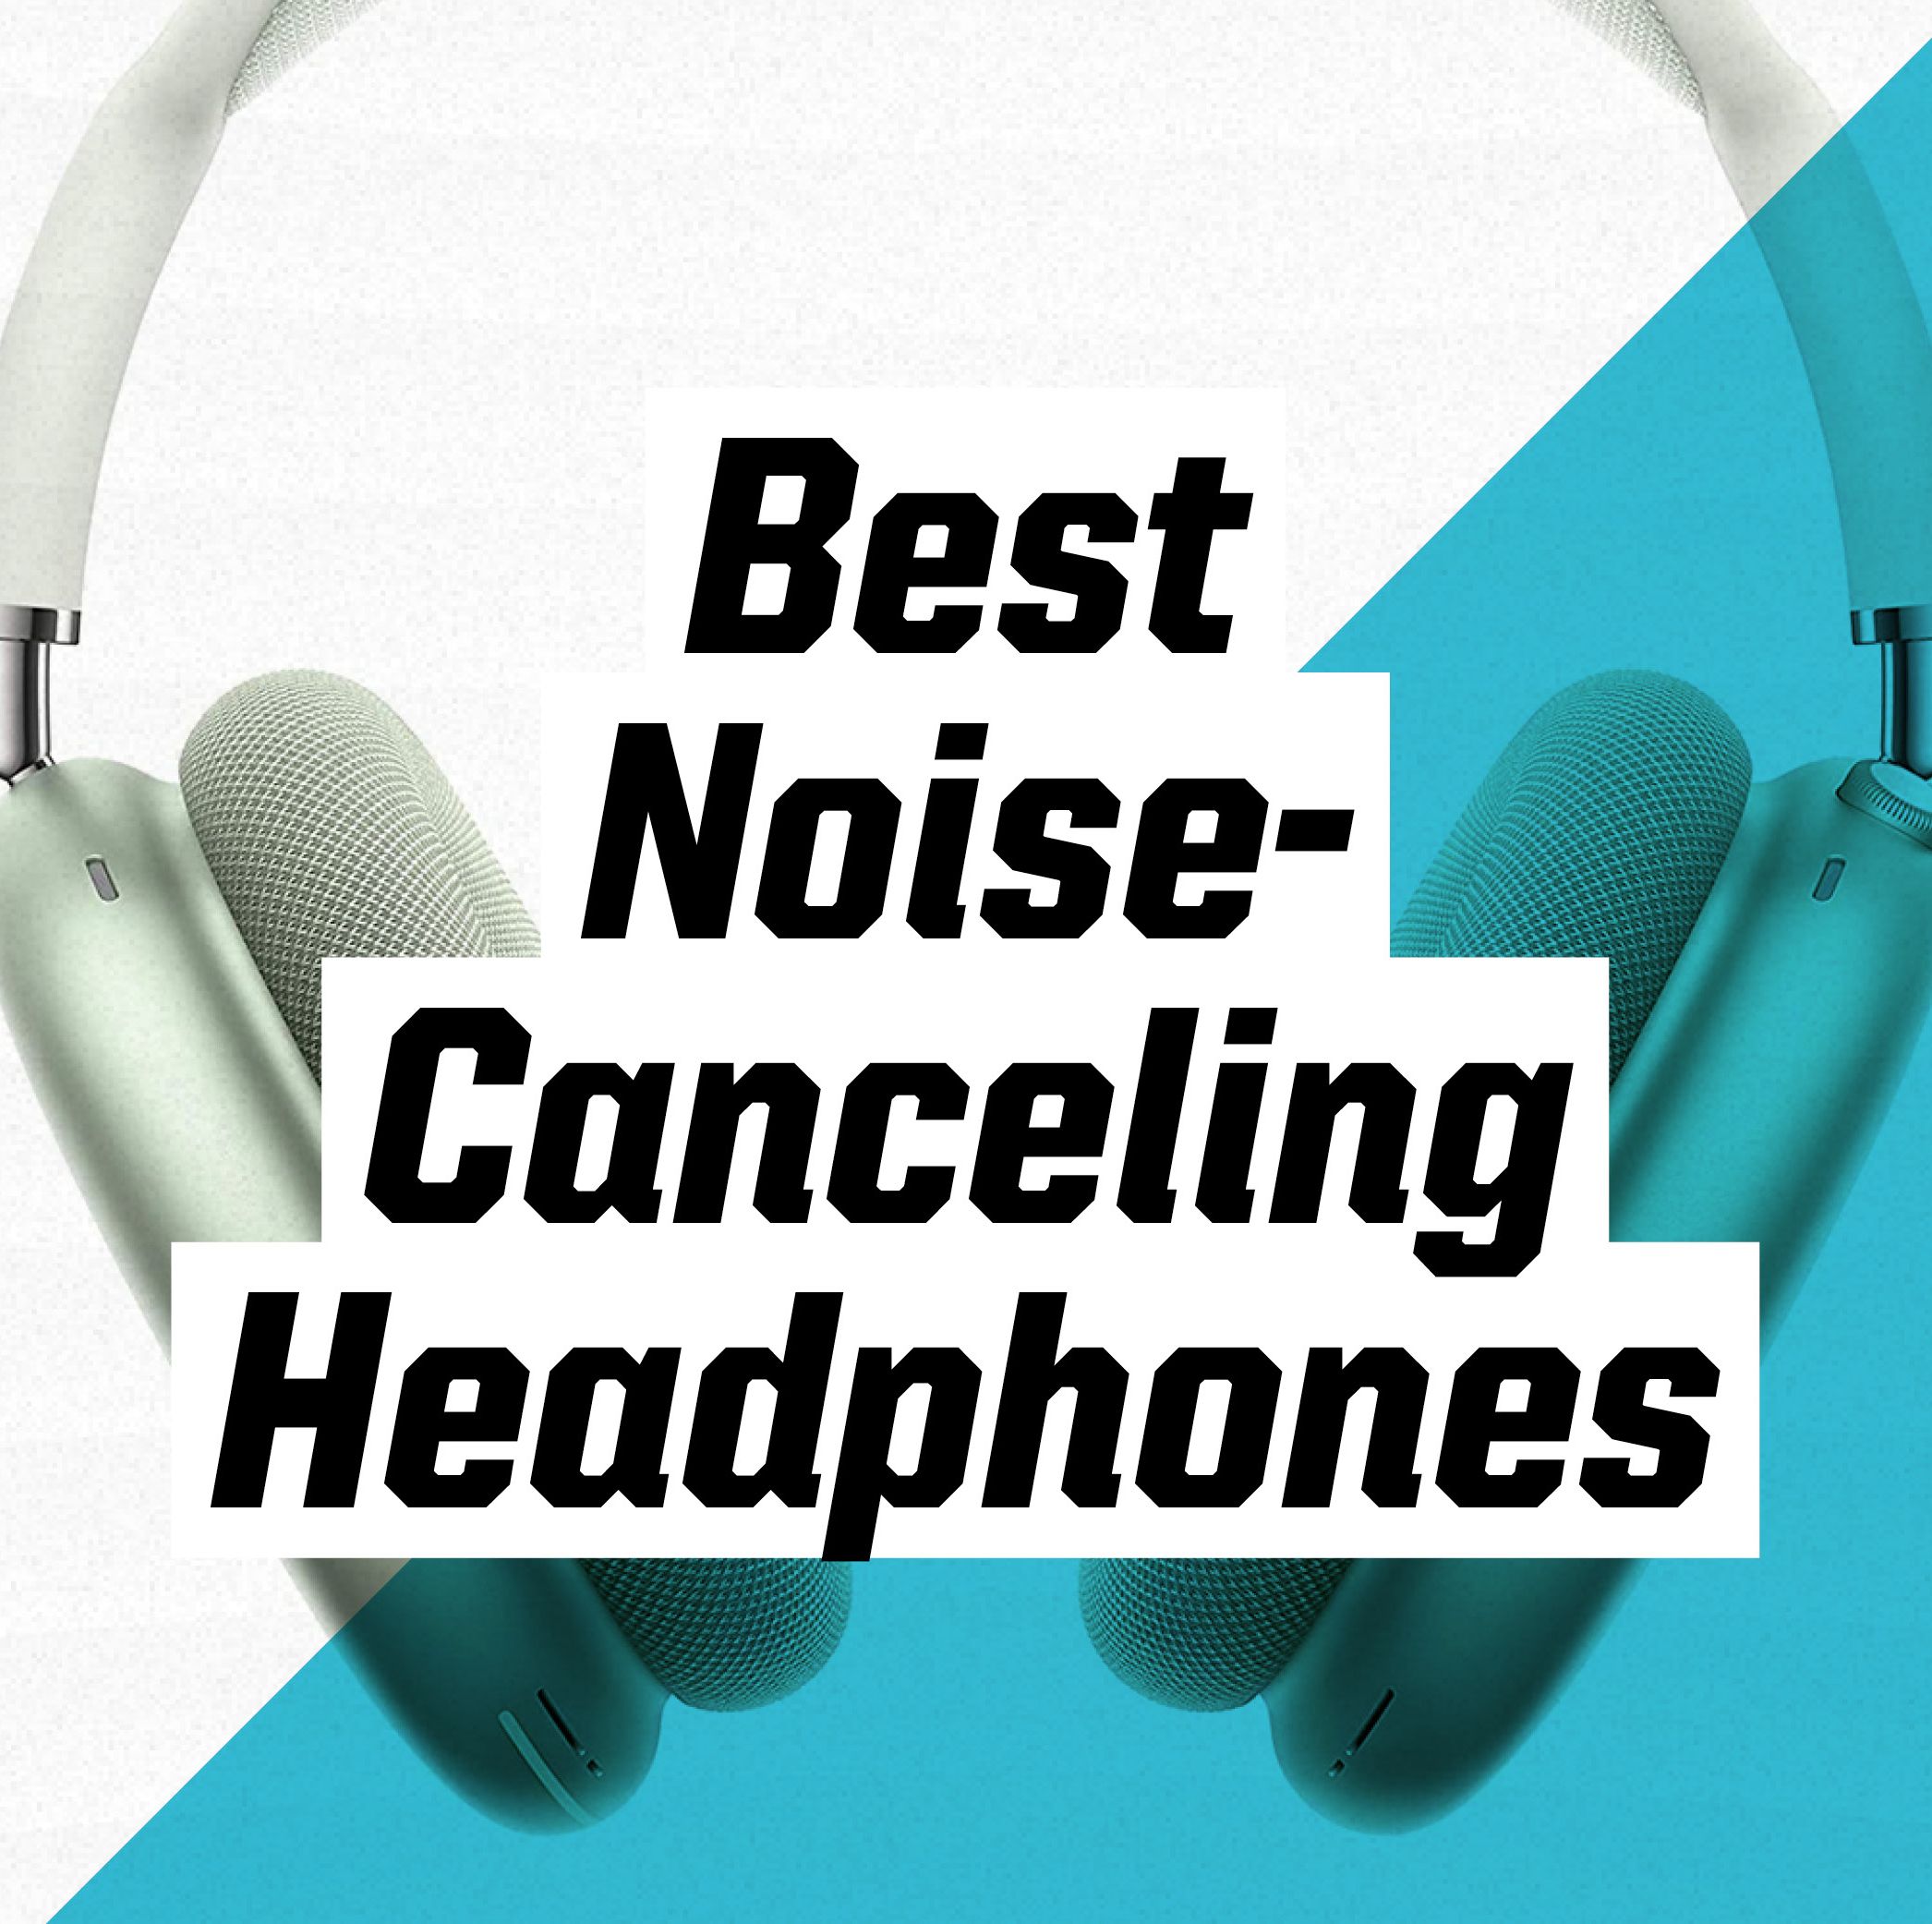 The Best Noise-Canceling Headphones to Drown Out Your Surroundings